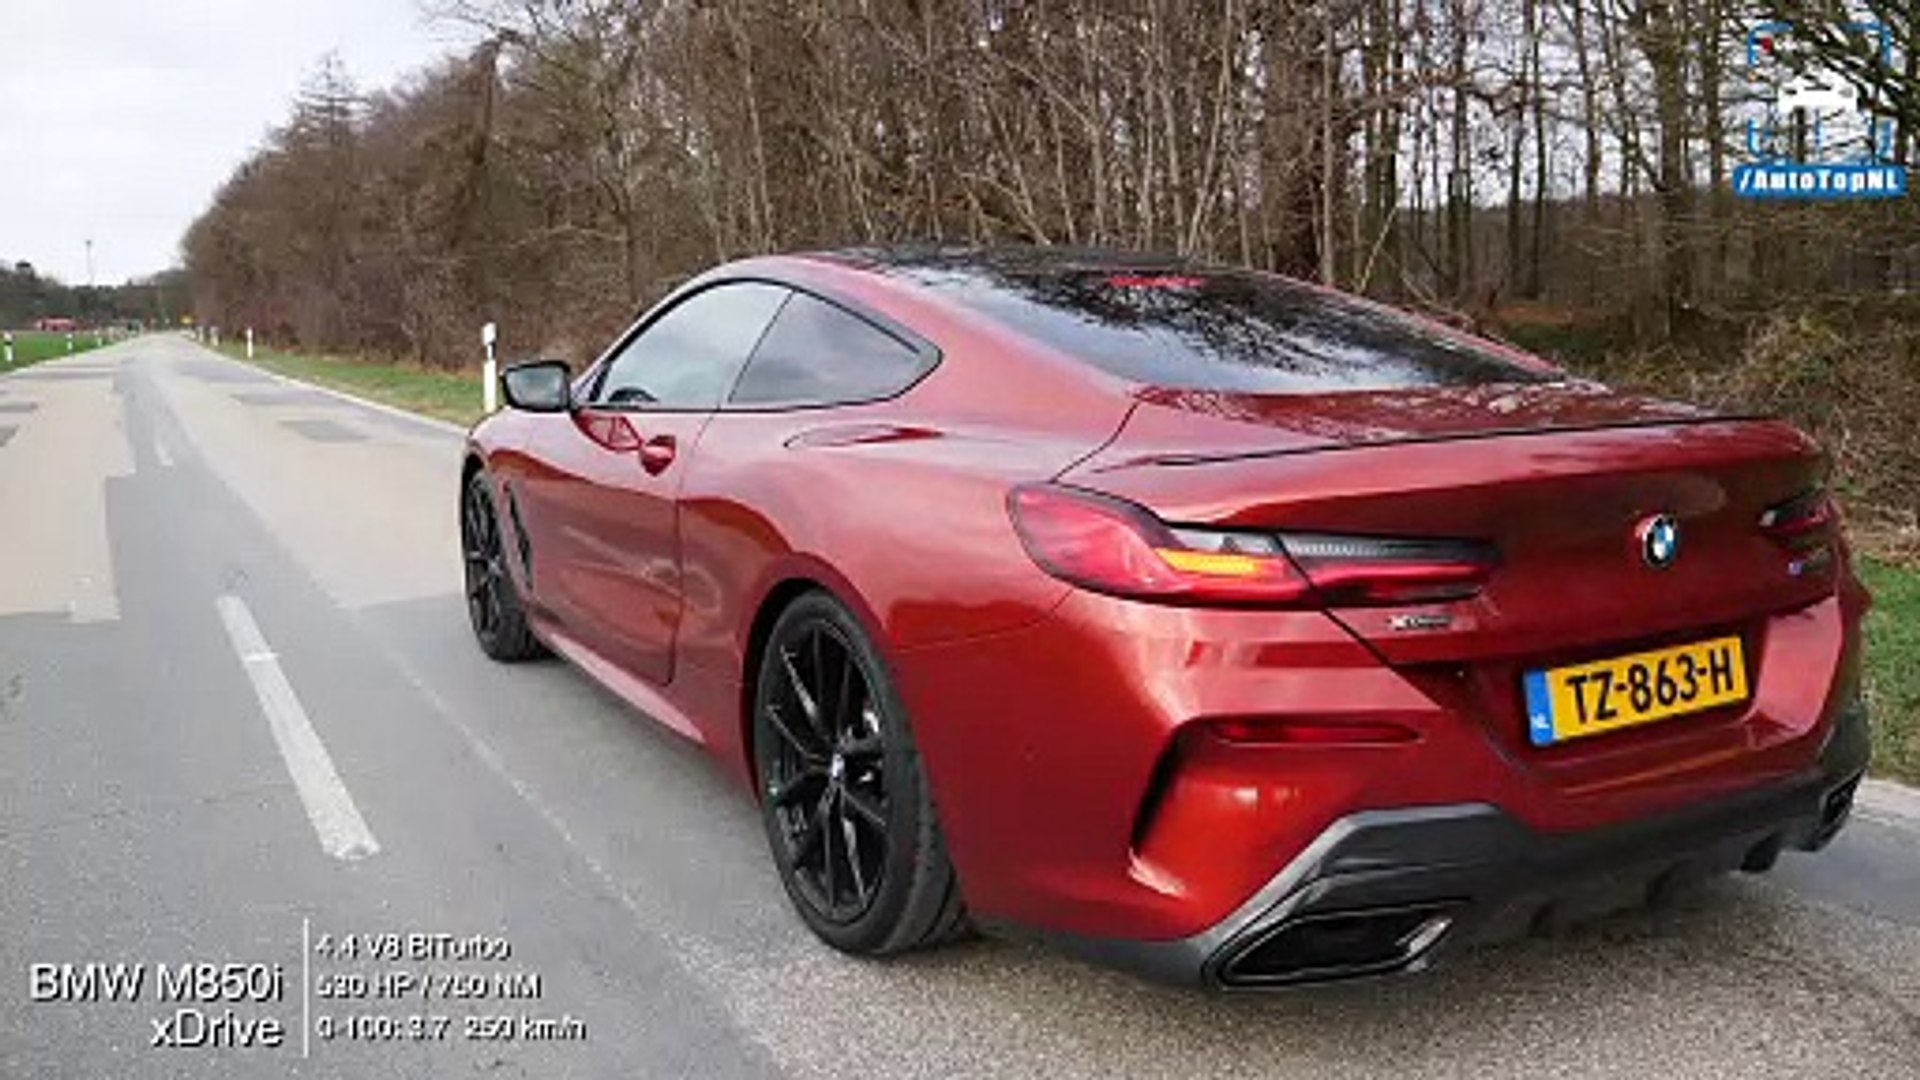 BMW M850i xDrive ACCELERATION & TOP SPEED 0-260KMH / 0-162MPH LAUNCH CONTROL by AutoTopNL